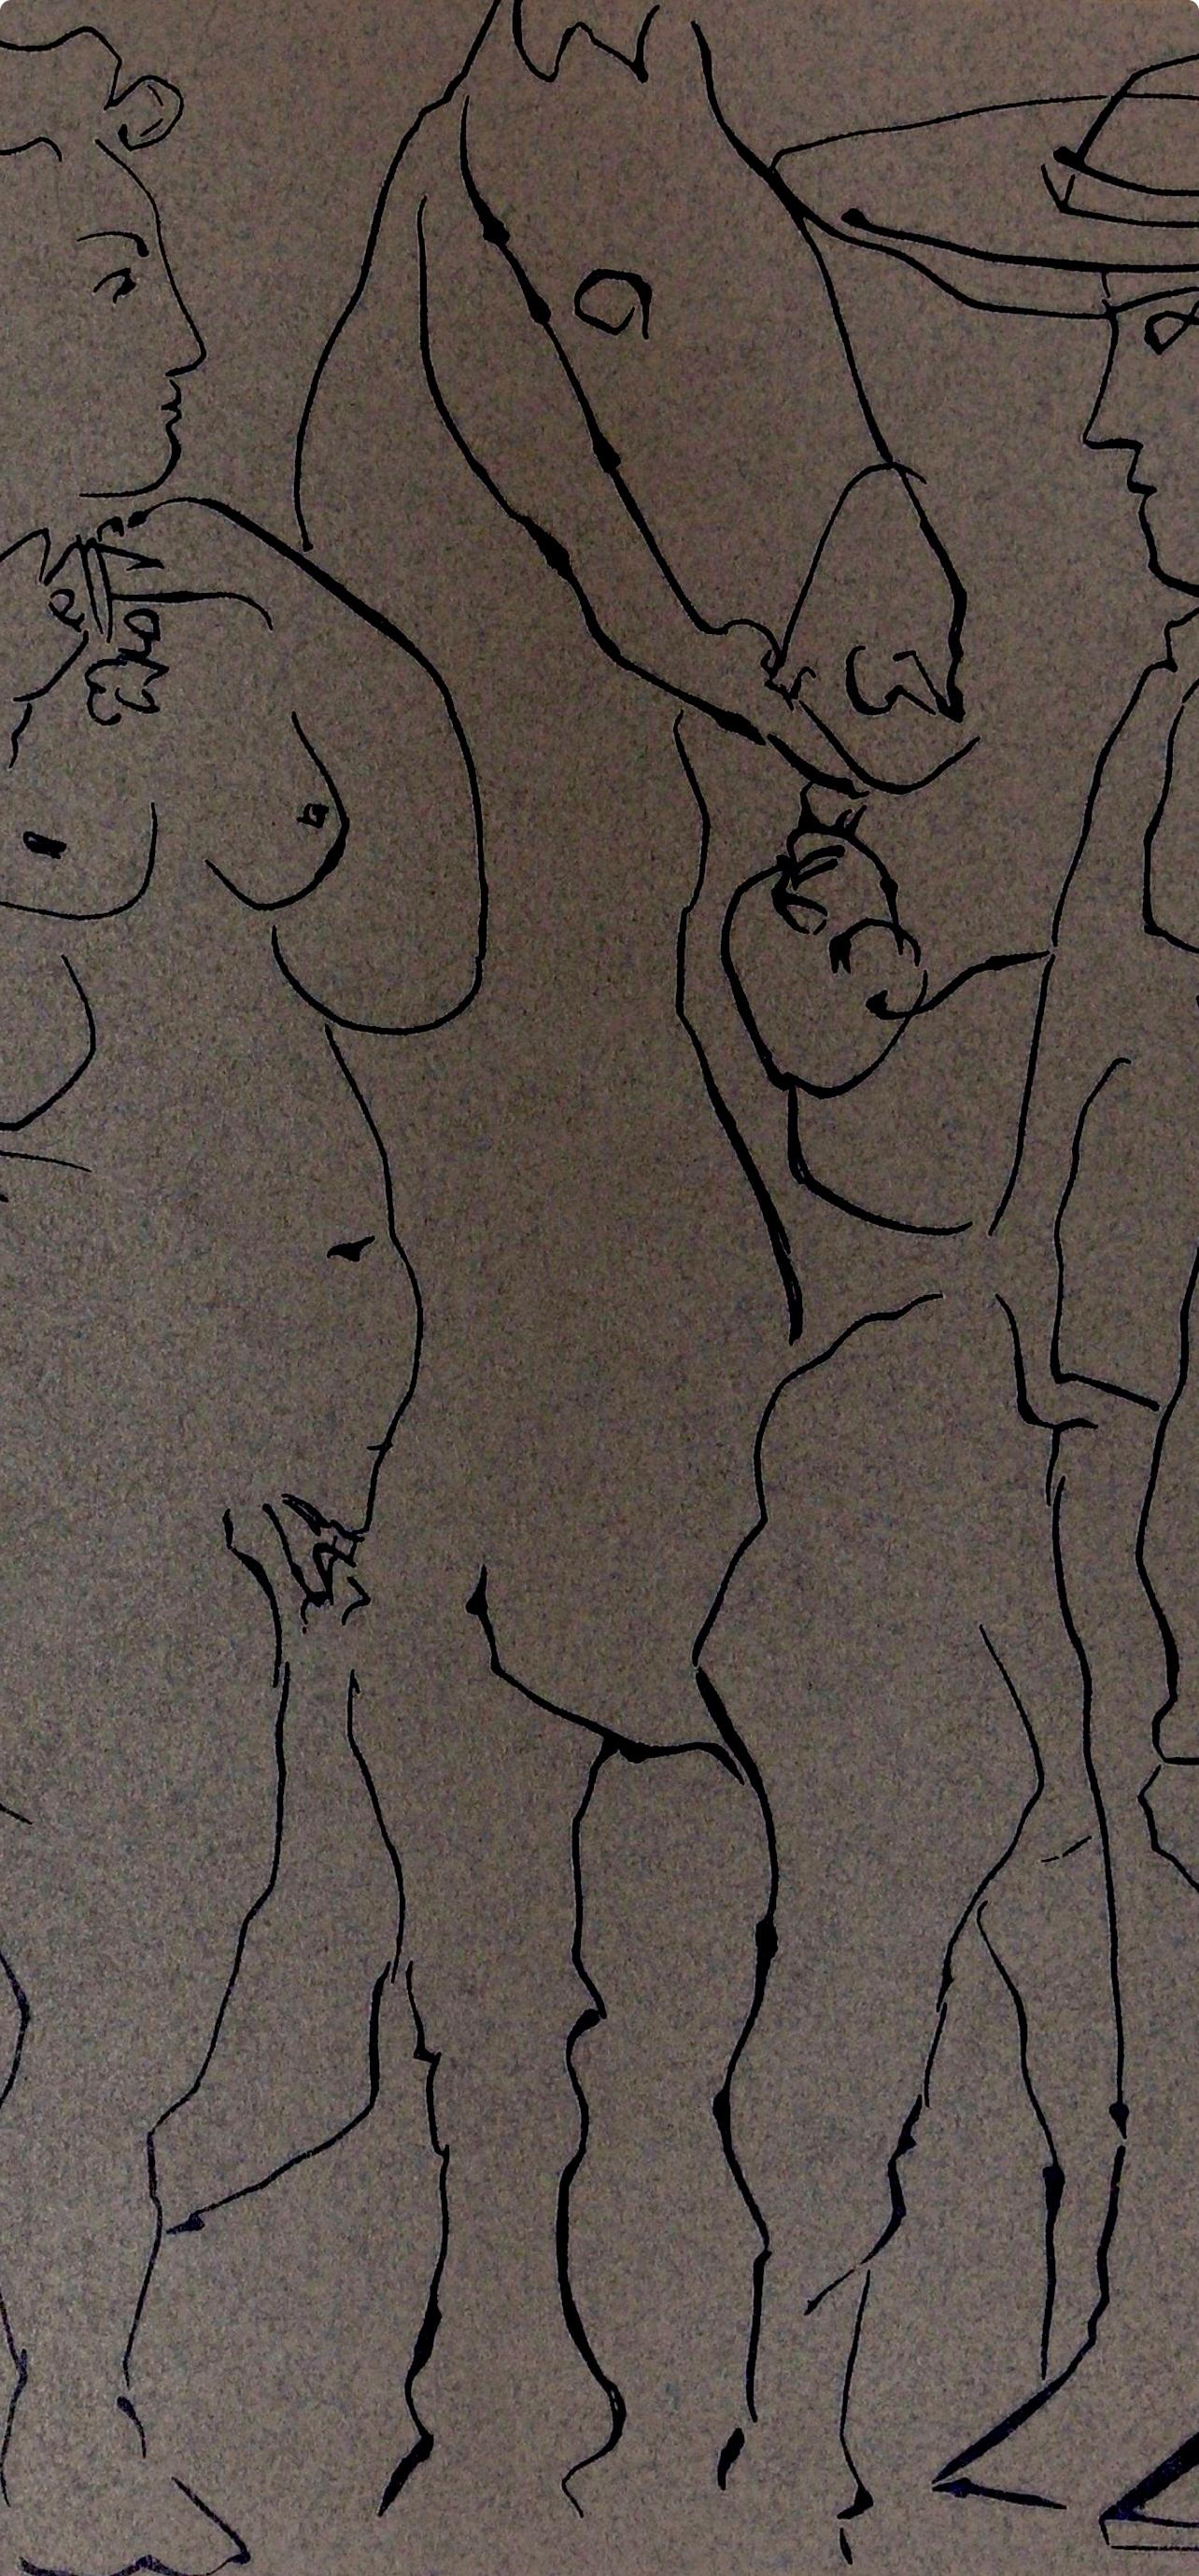 Picasso, Picador, Woman, and Horse, Pablo Picasso-Linogravures (after) For Sale 2